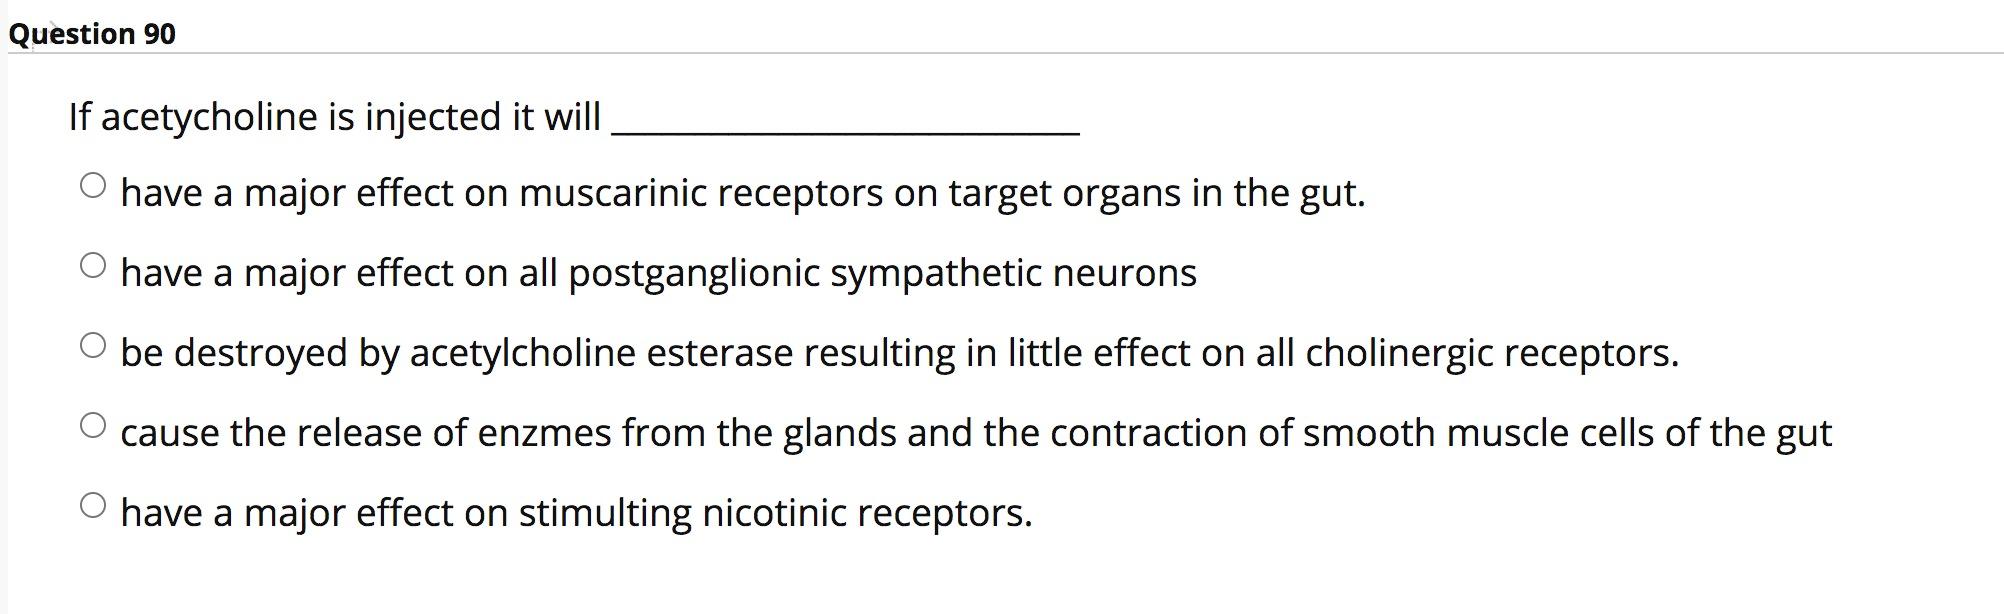 Question 90 If acetycholine is injected it will O have a major effect on muscarinic receptors on target organs in the gut. O